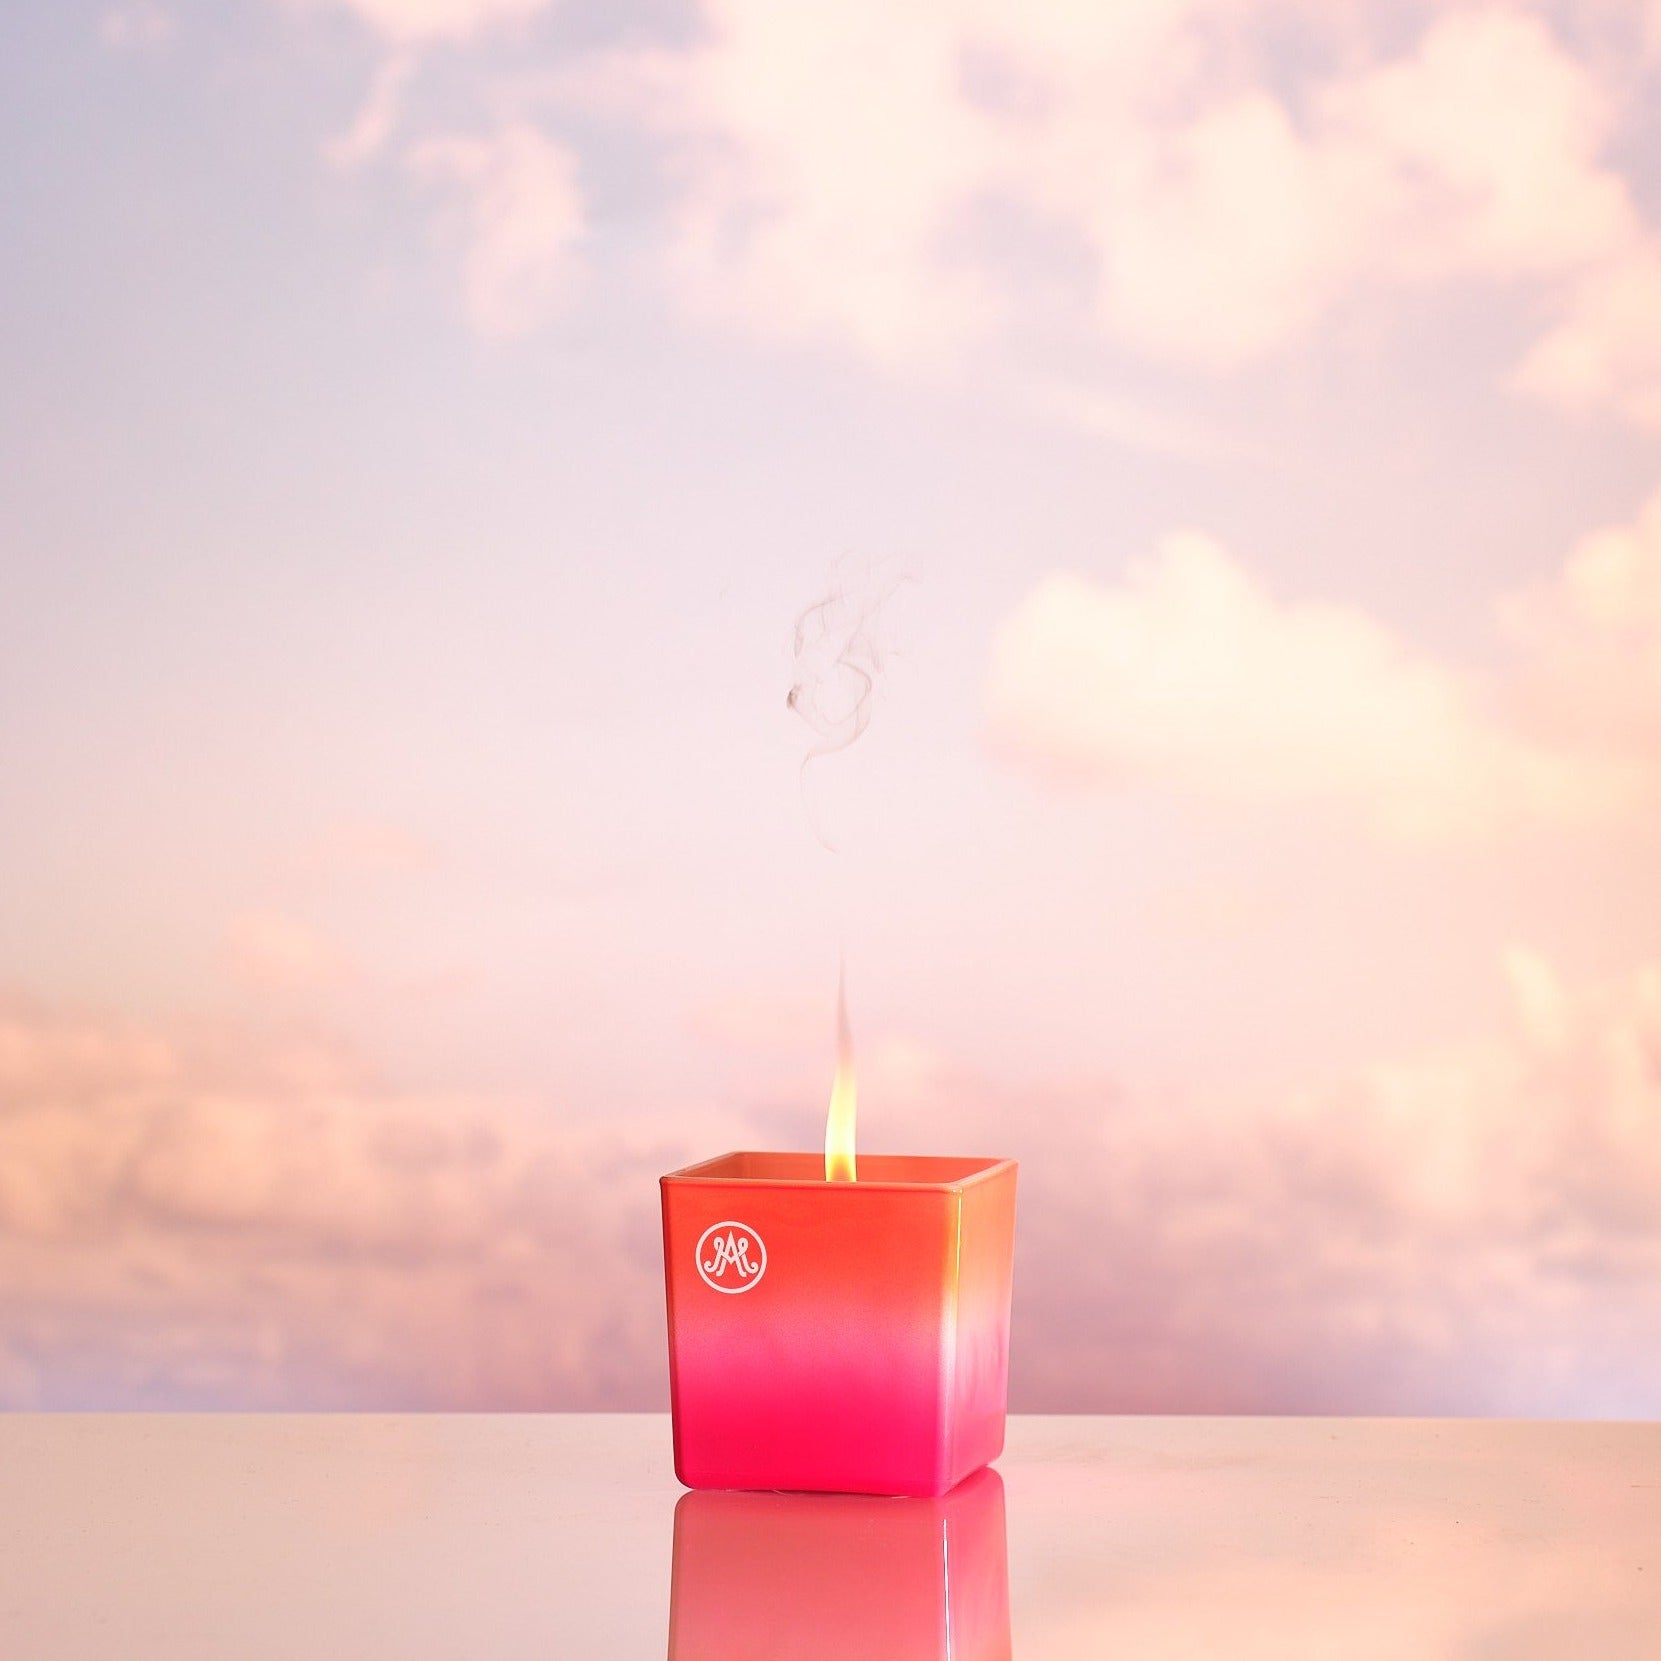 SUNSET VI Flos Felicitas Candle Scented Candle 190g